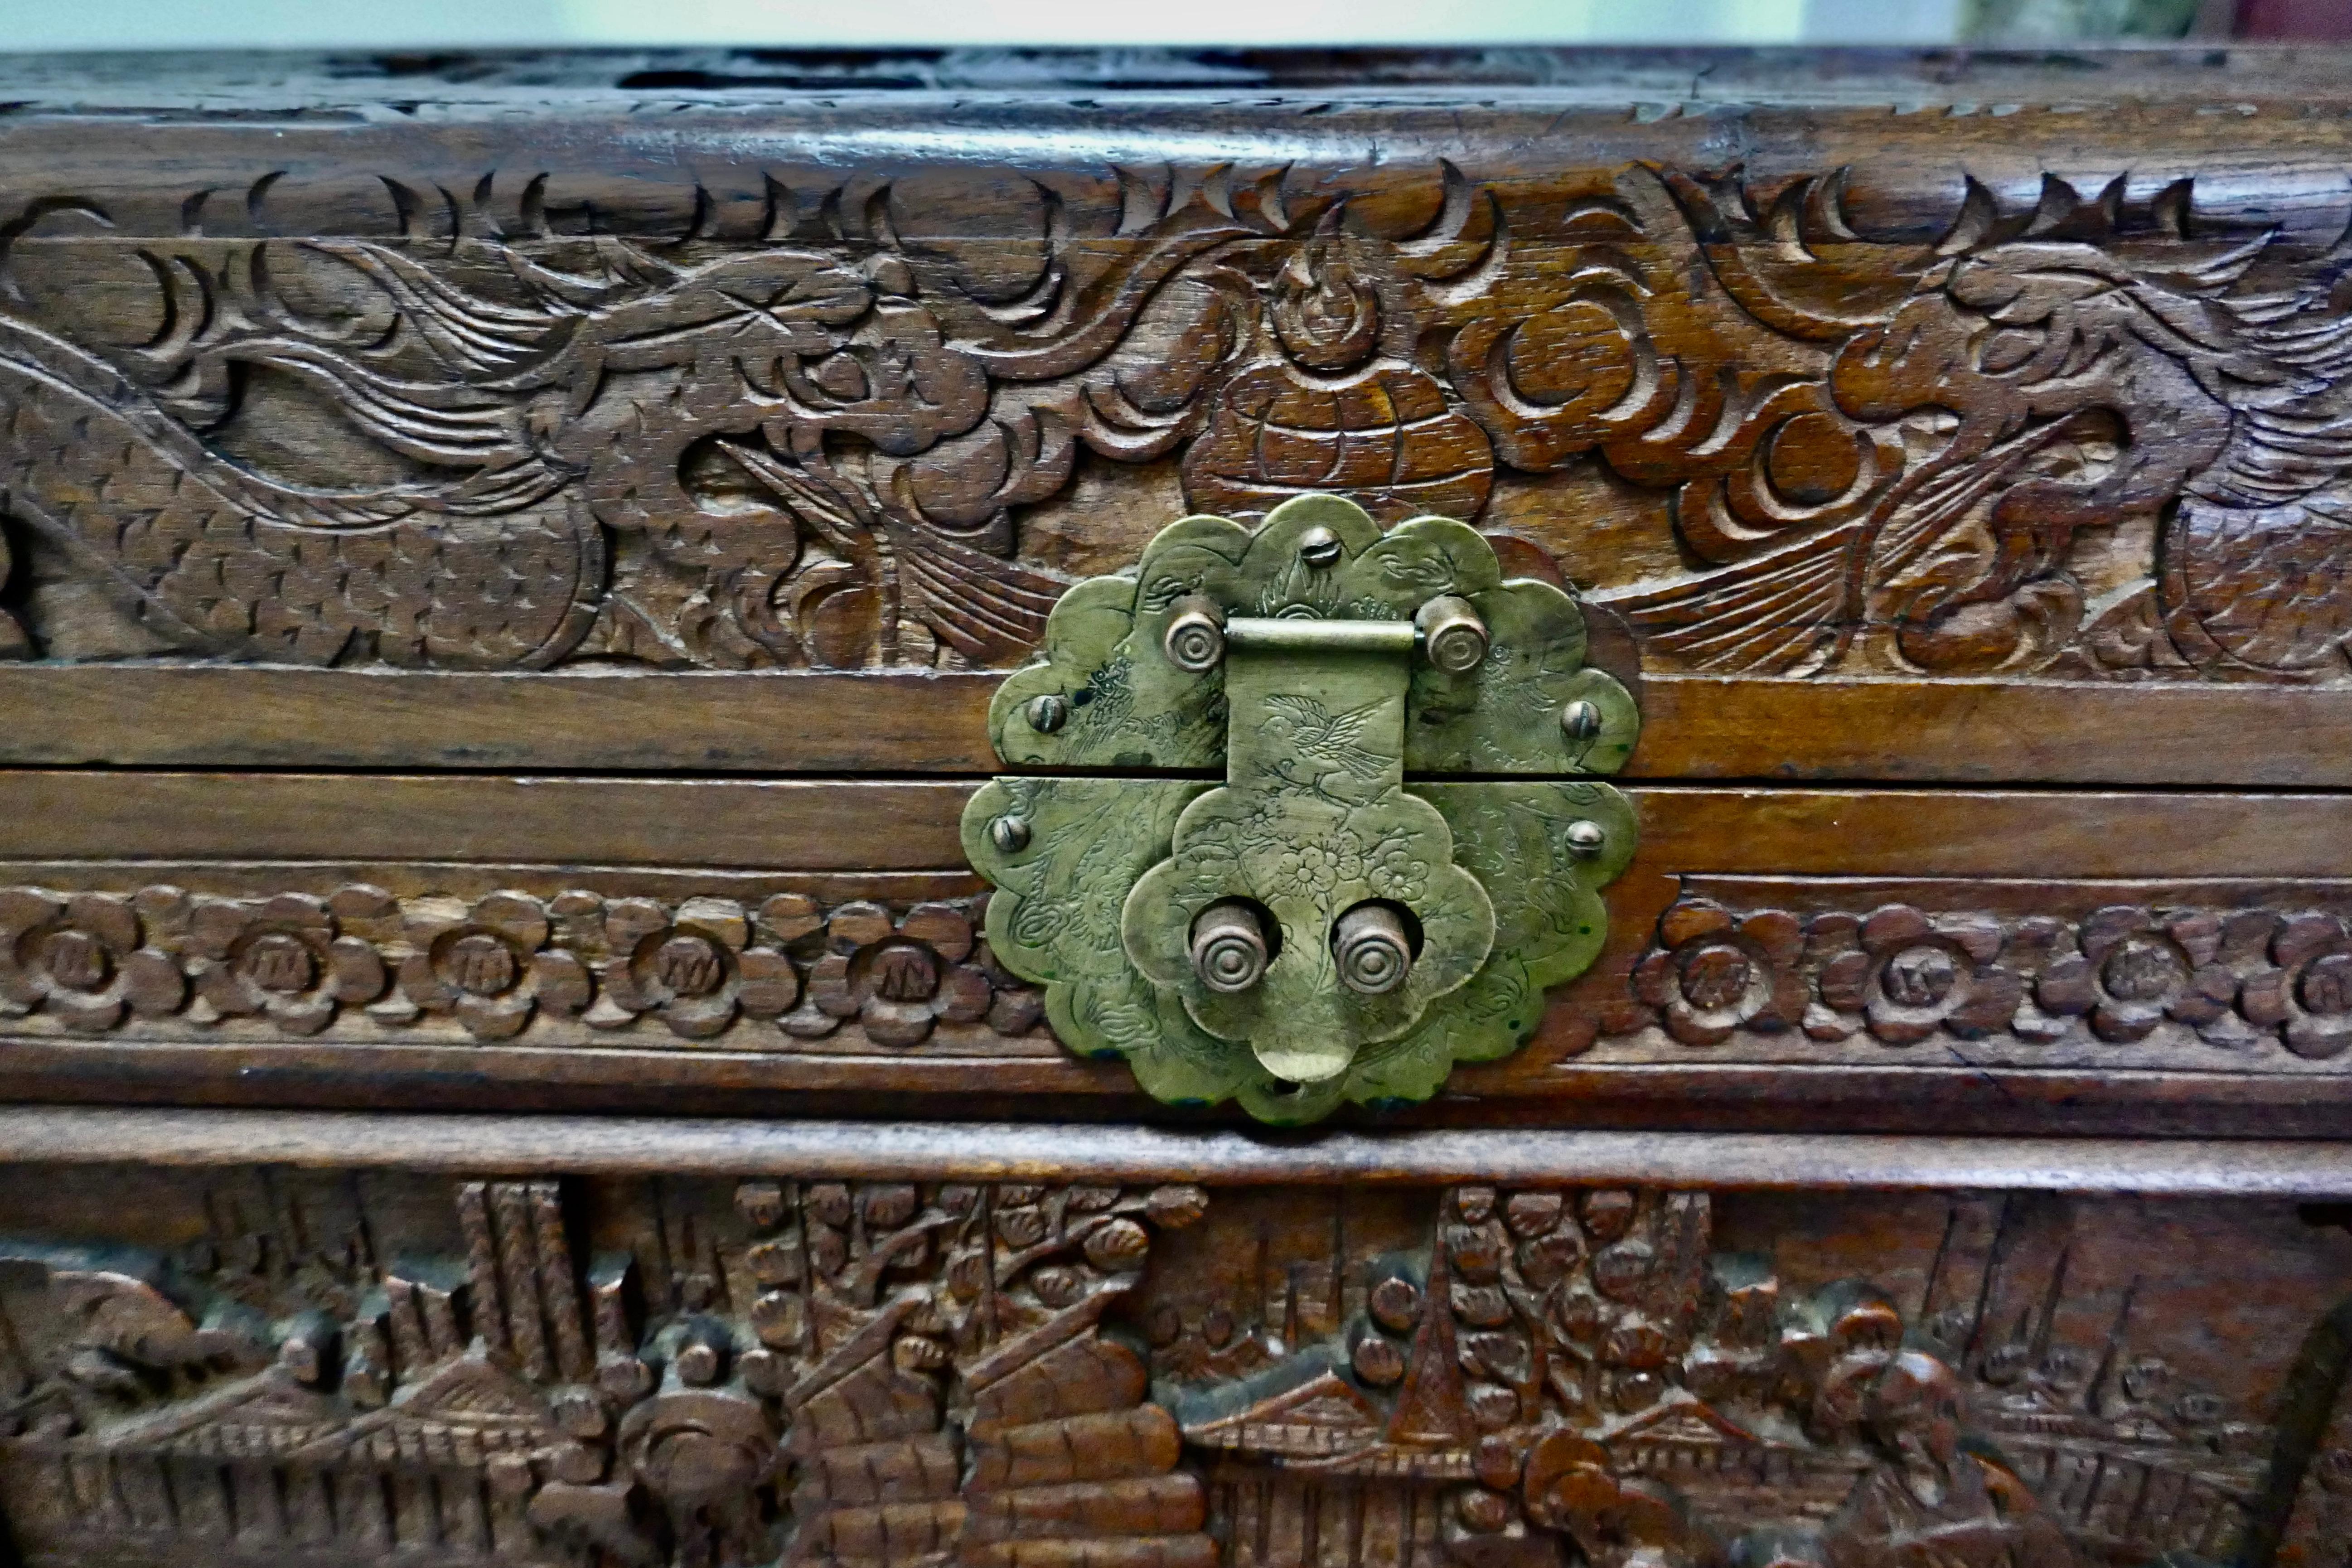 carved camphor wood chest